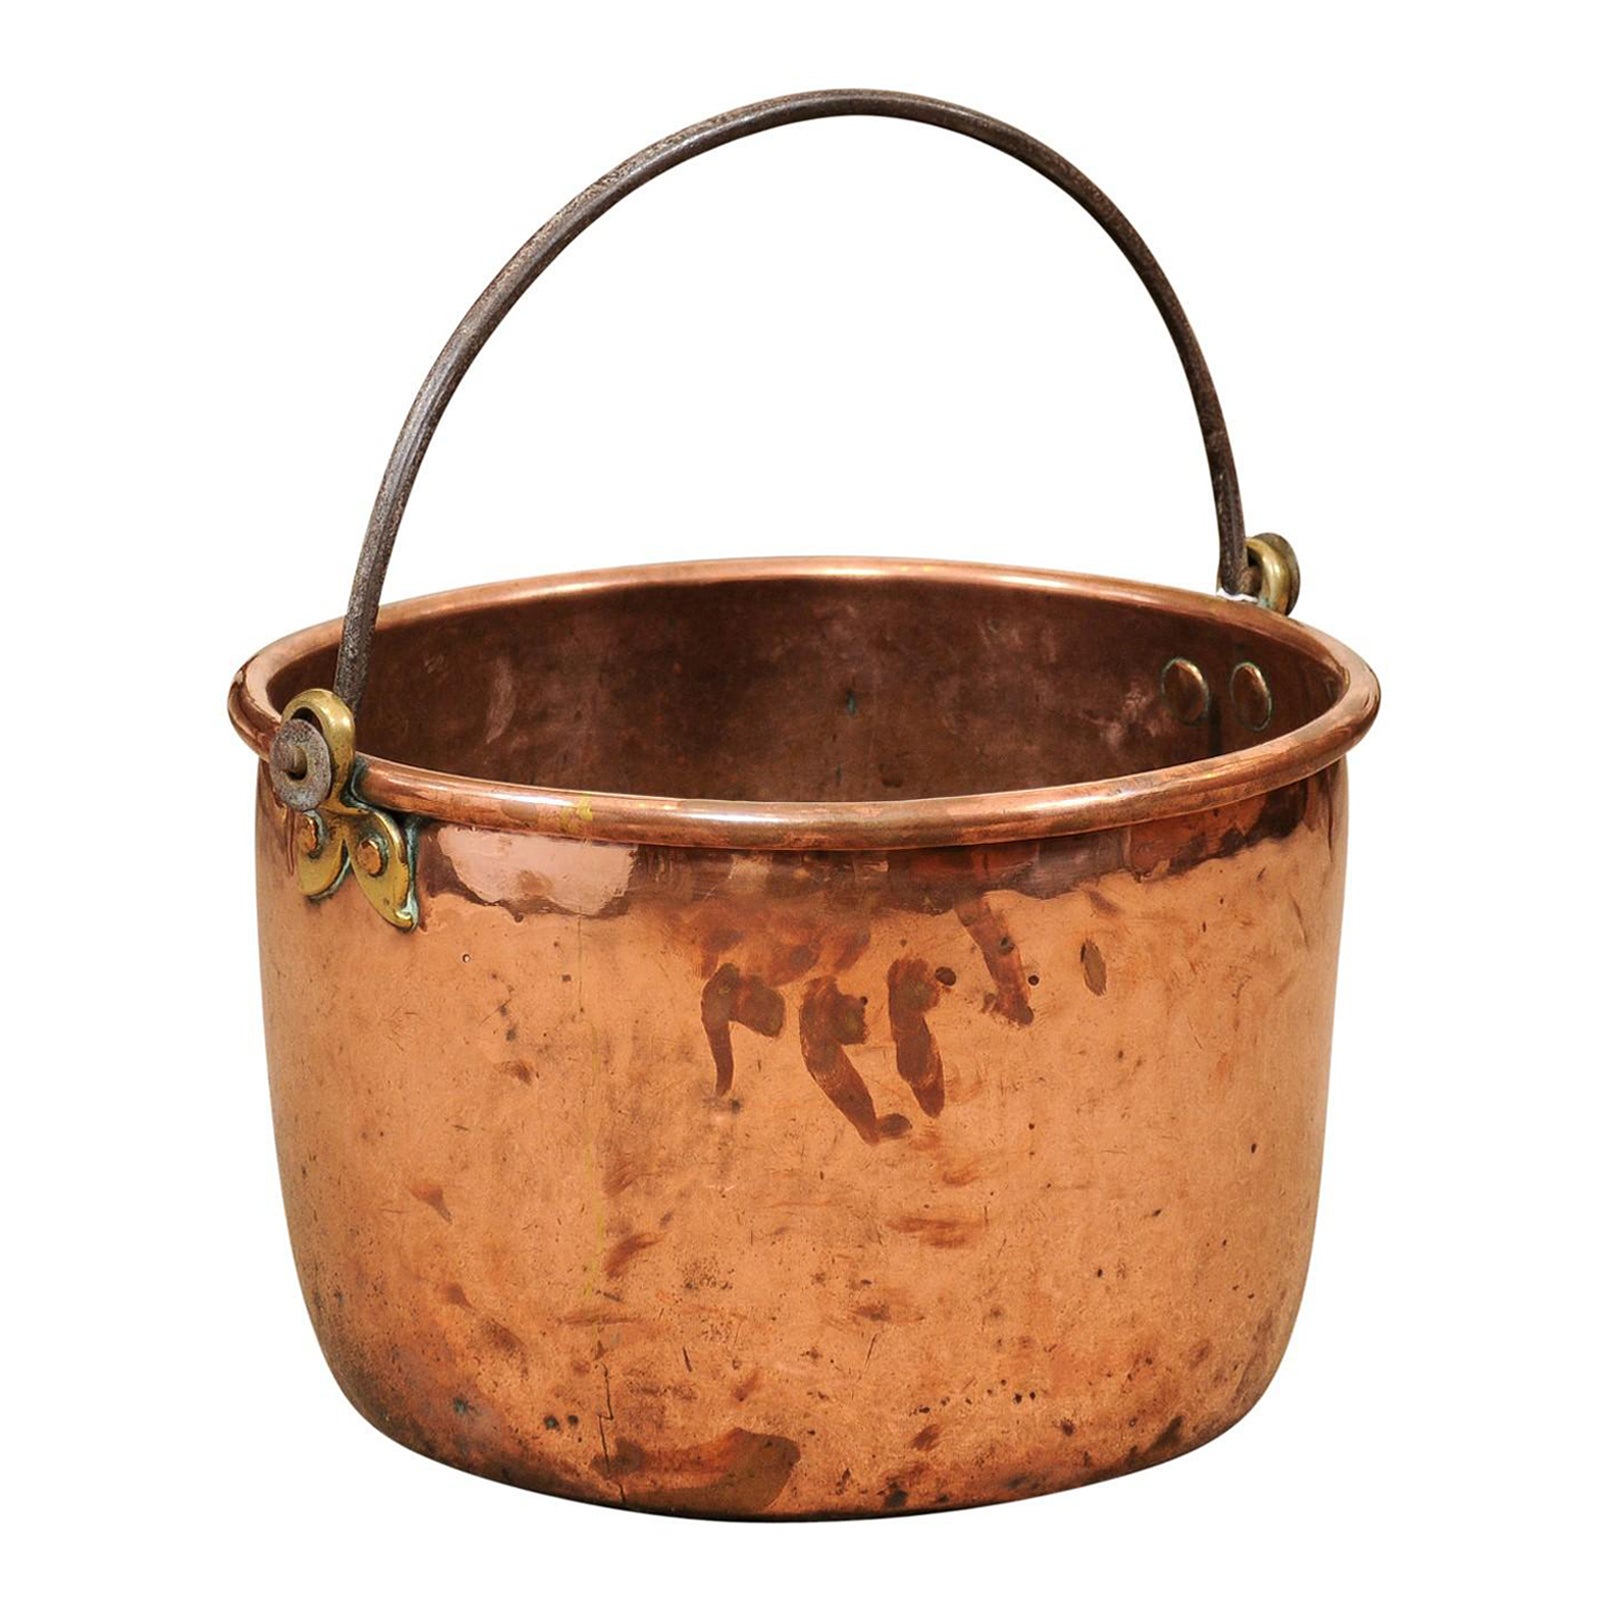  Large 18th Century Copper Pot with Wrought Iron Handle For Sale